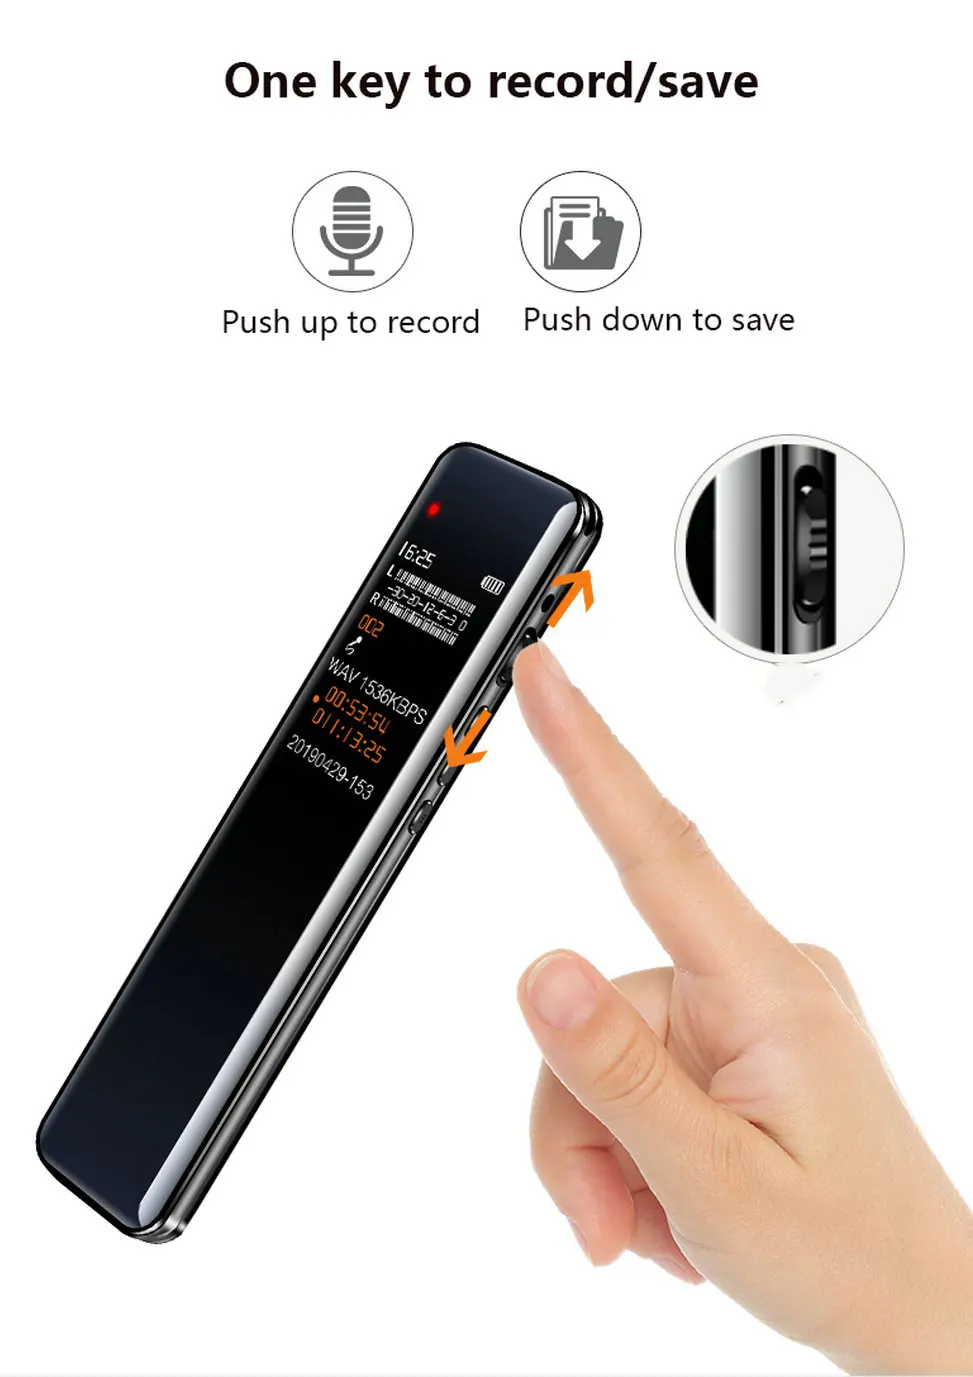 Professional 1536kbps Digital Voice Activated Recorder Mini Dictaphone Adc Noise Control Audio Recorder Mp3 Player V94 Buy Voice Recorder Portable Portable Digital Voice Recorder Pocket Voice Recorder Product On Alibaba Com